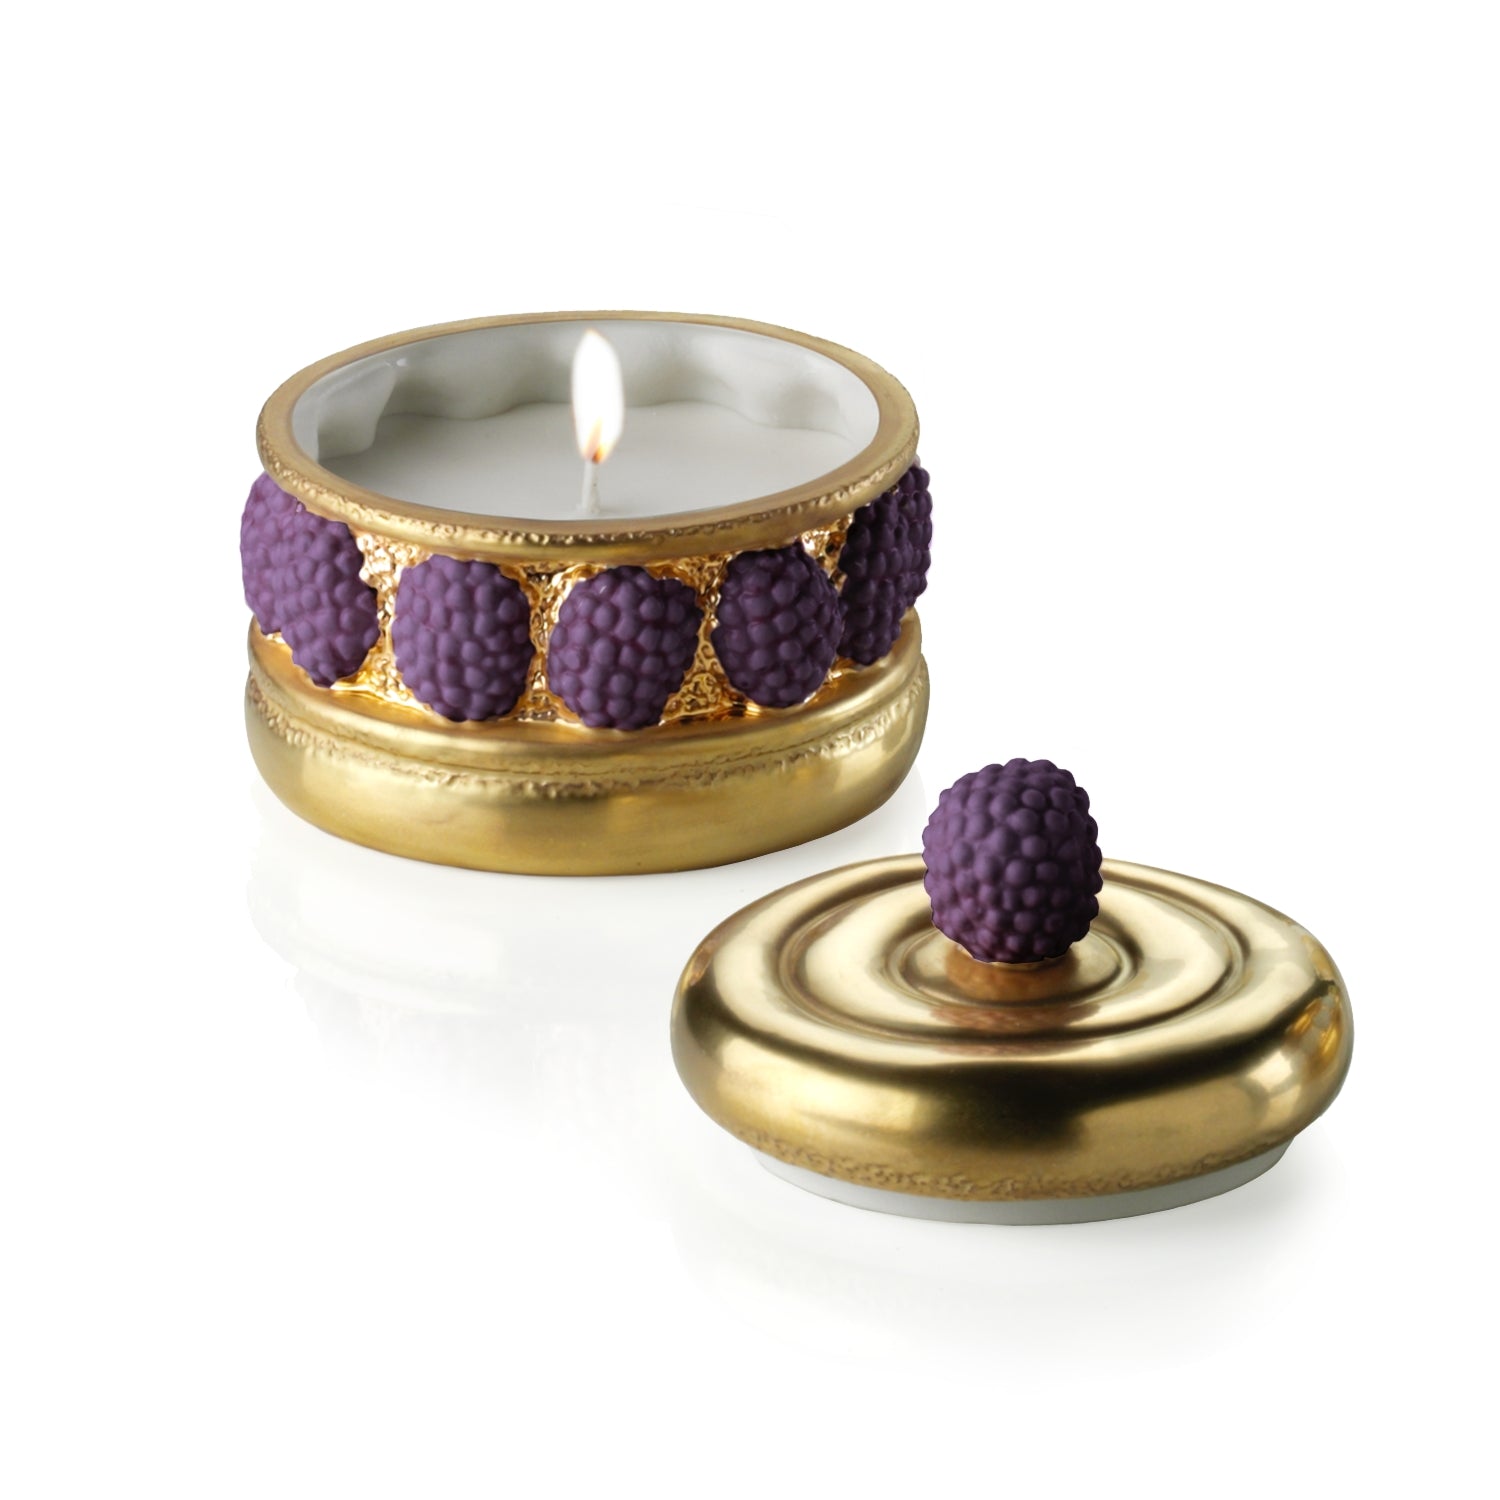 Chantilly Ispahan Cake Scented Candle - Gold & Fuchsia